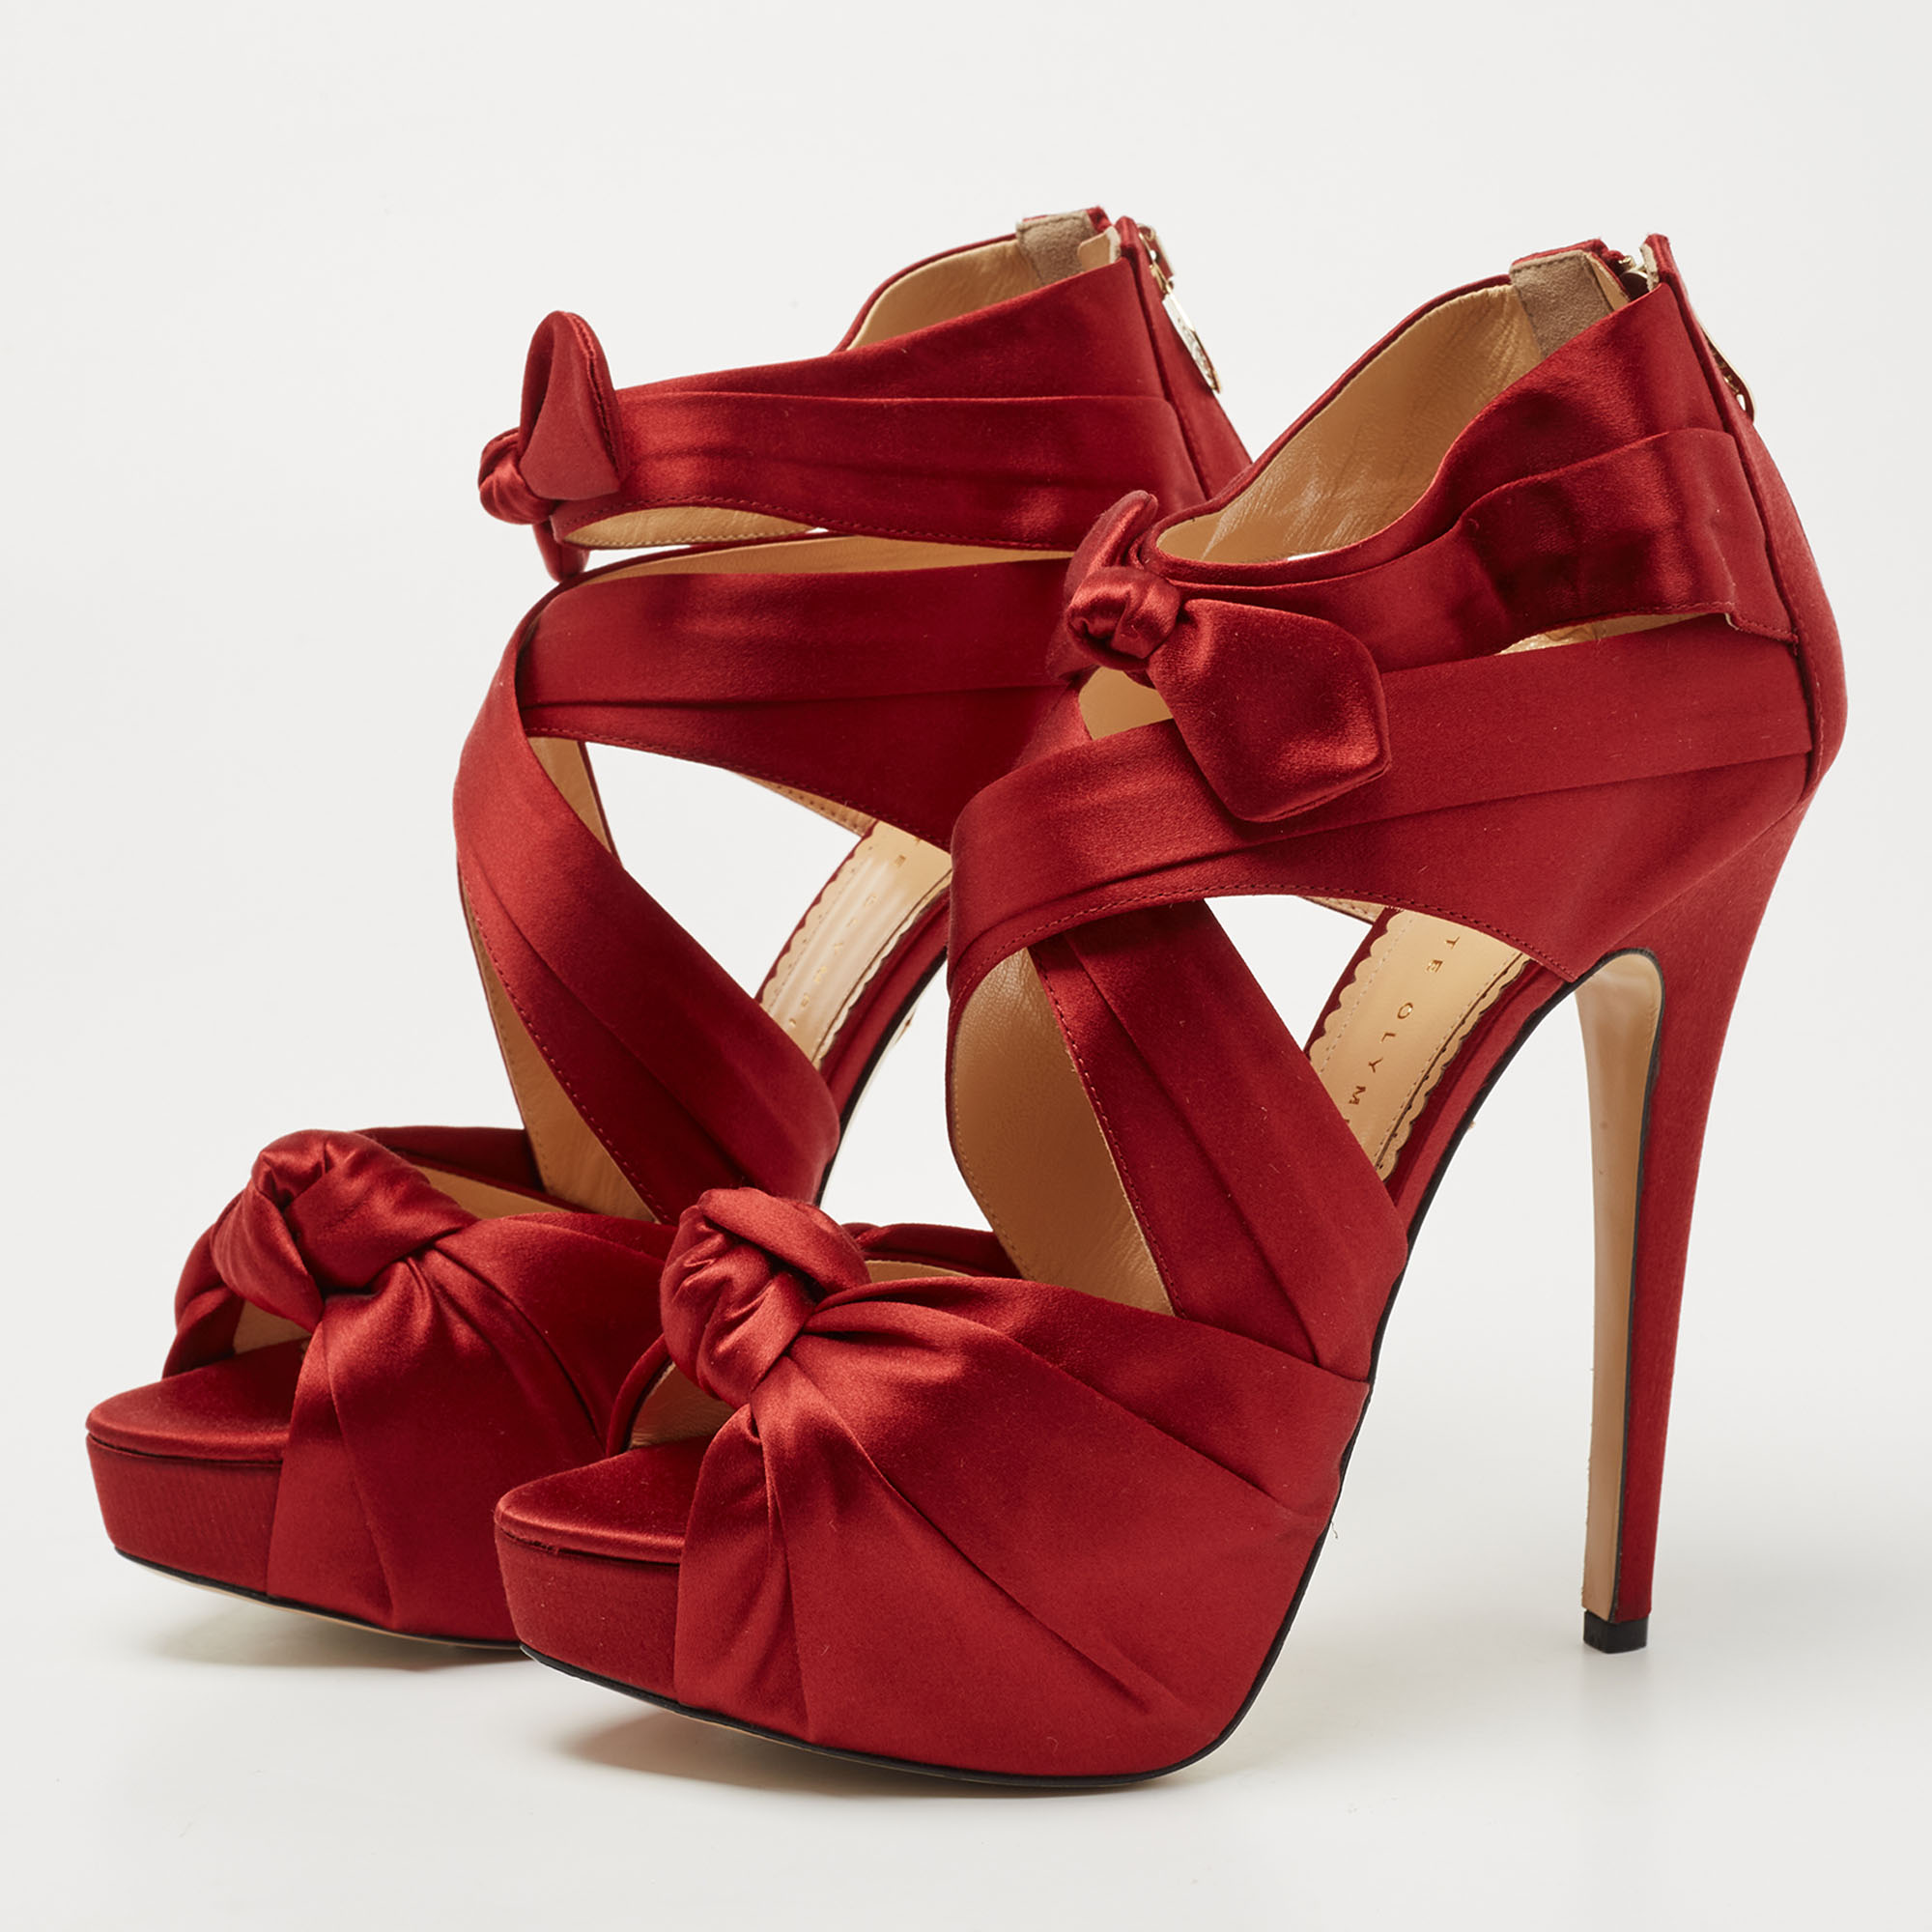 

Charlotte Olympia Red Satin Andrea Platform Sandals Size